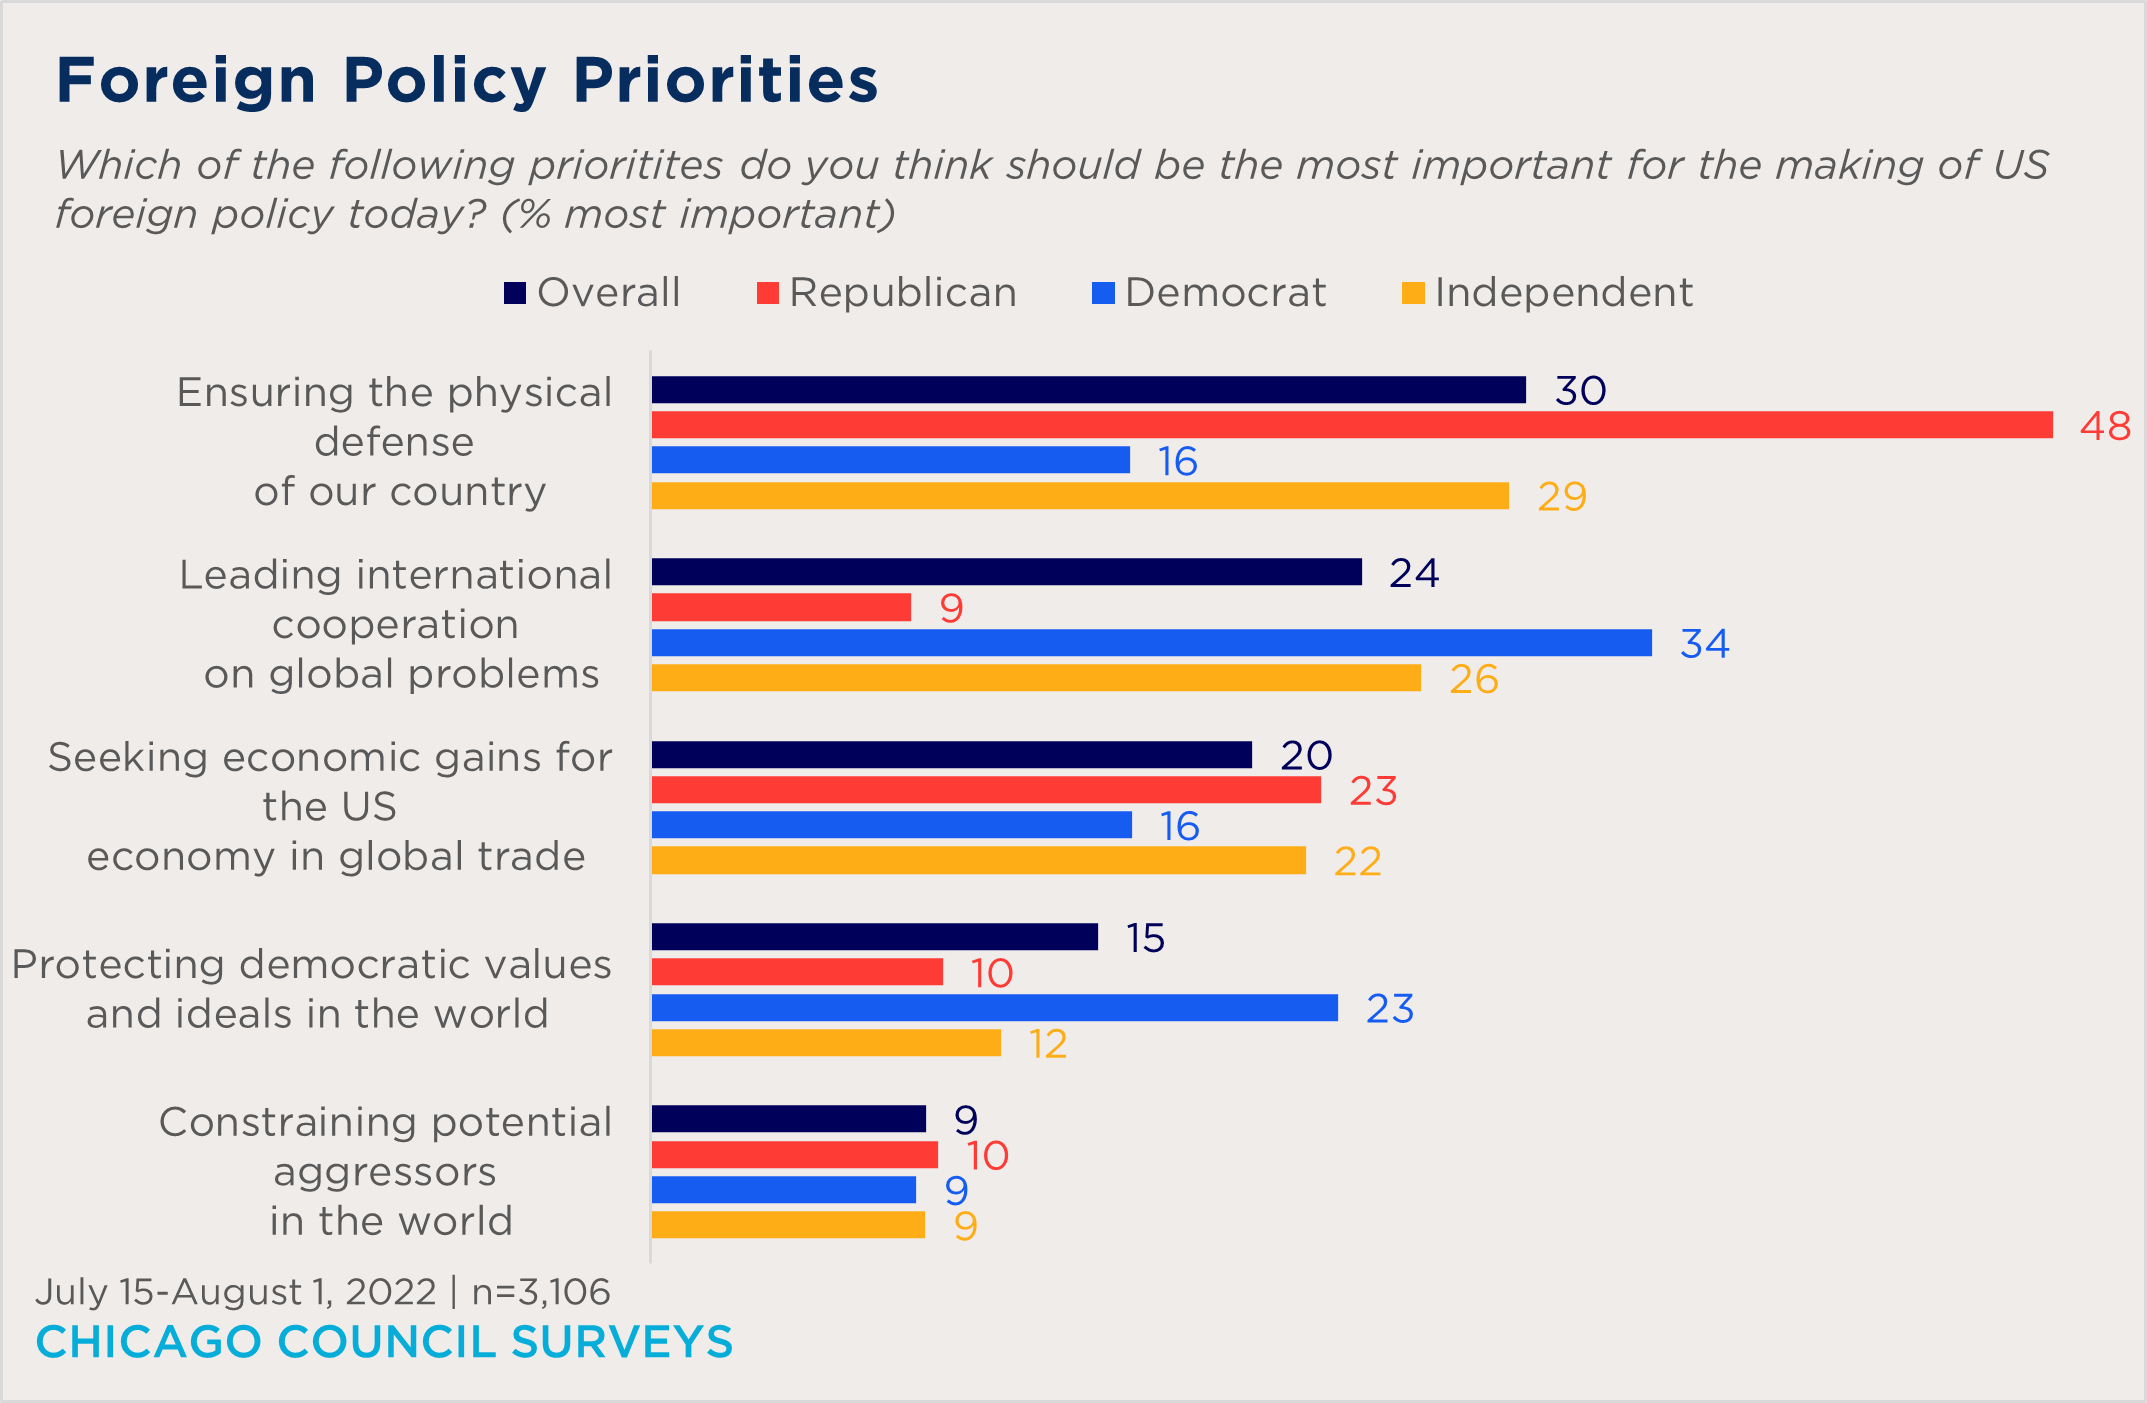 "bar chart showing foreign policy priorities by party"